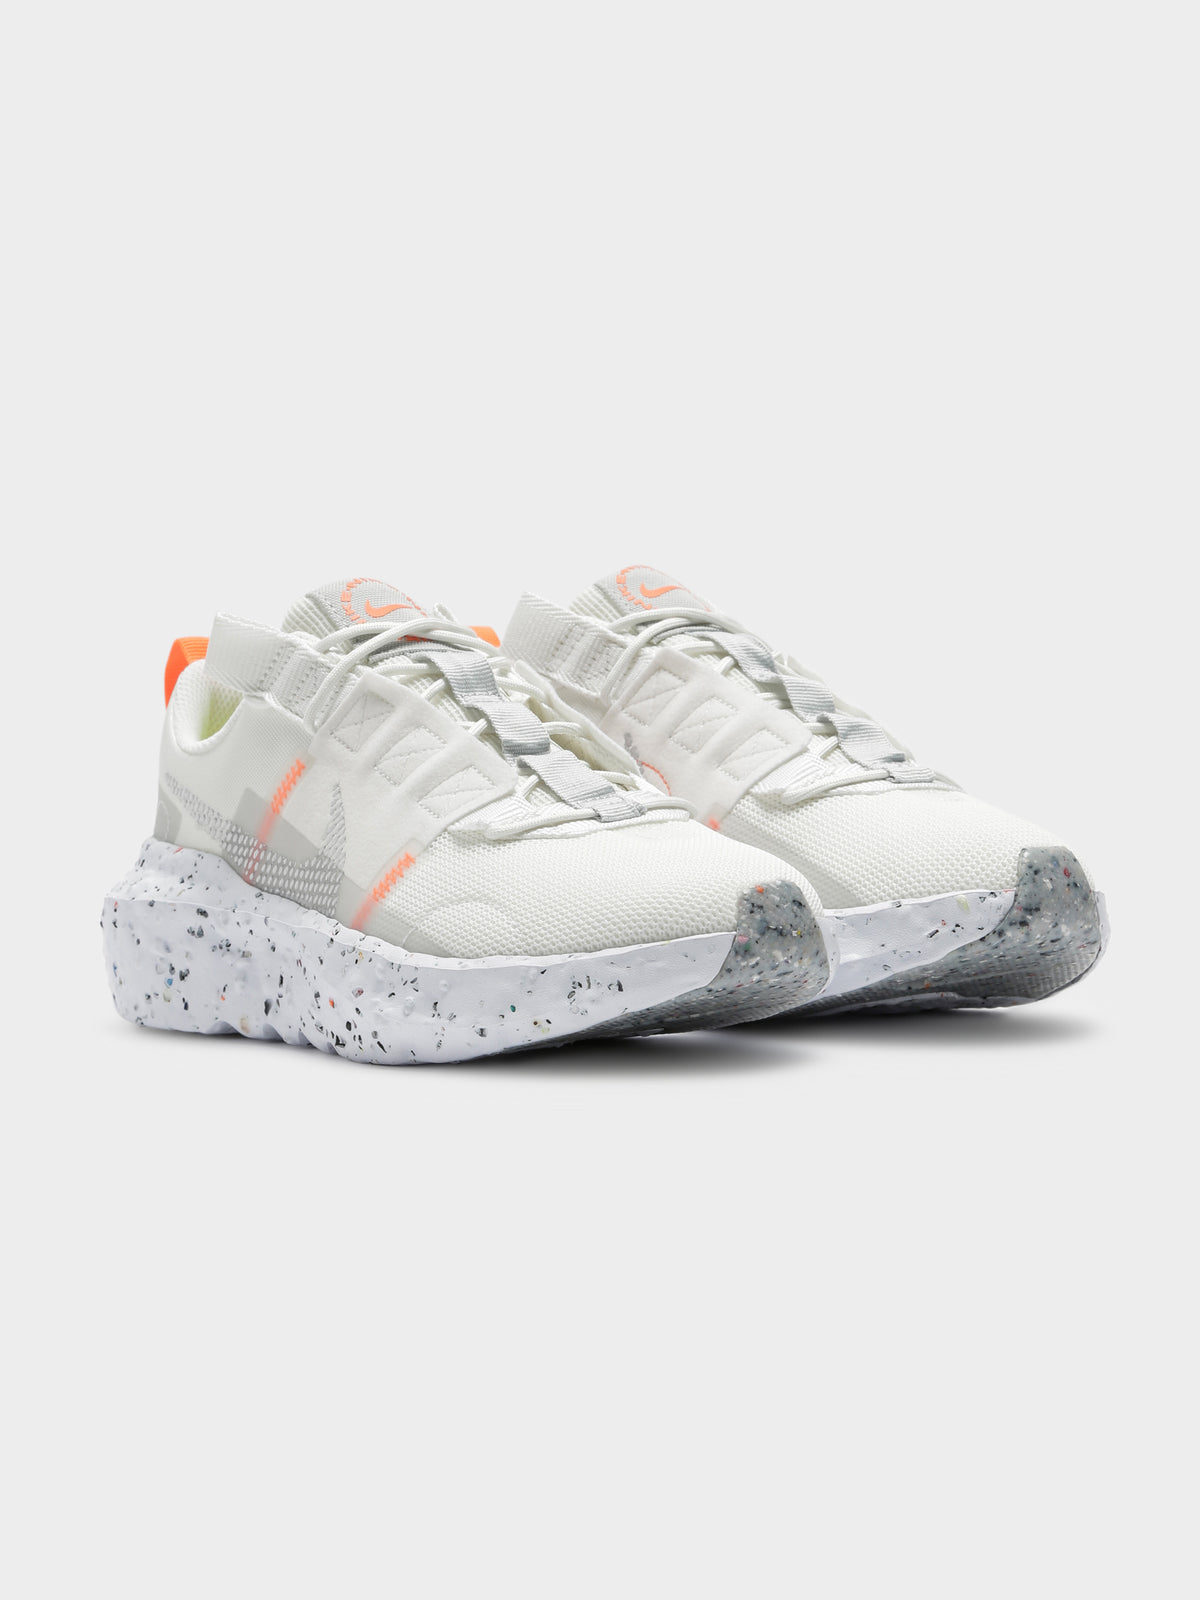 Womens Crater Impact Sneakers in Summit White